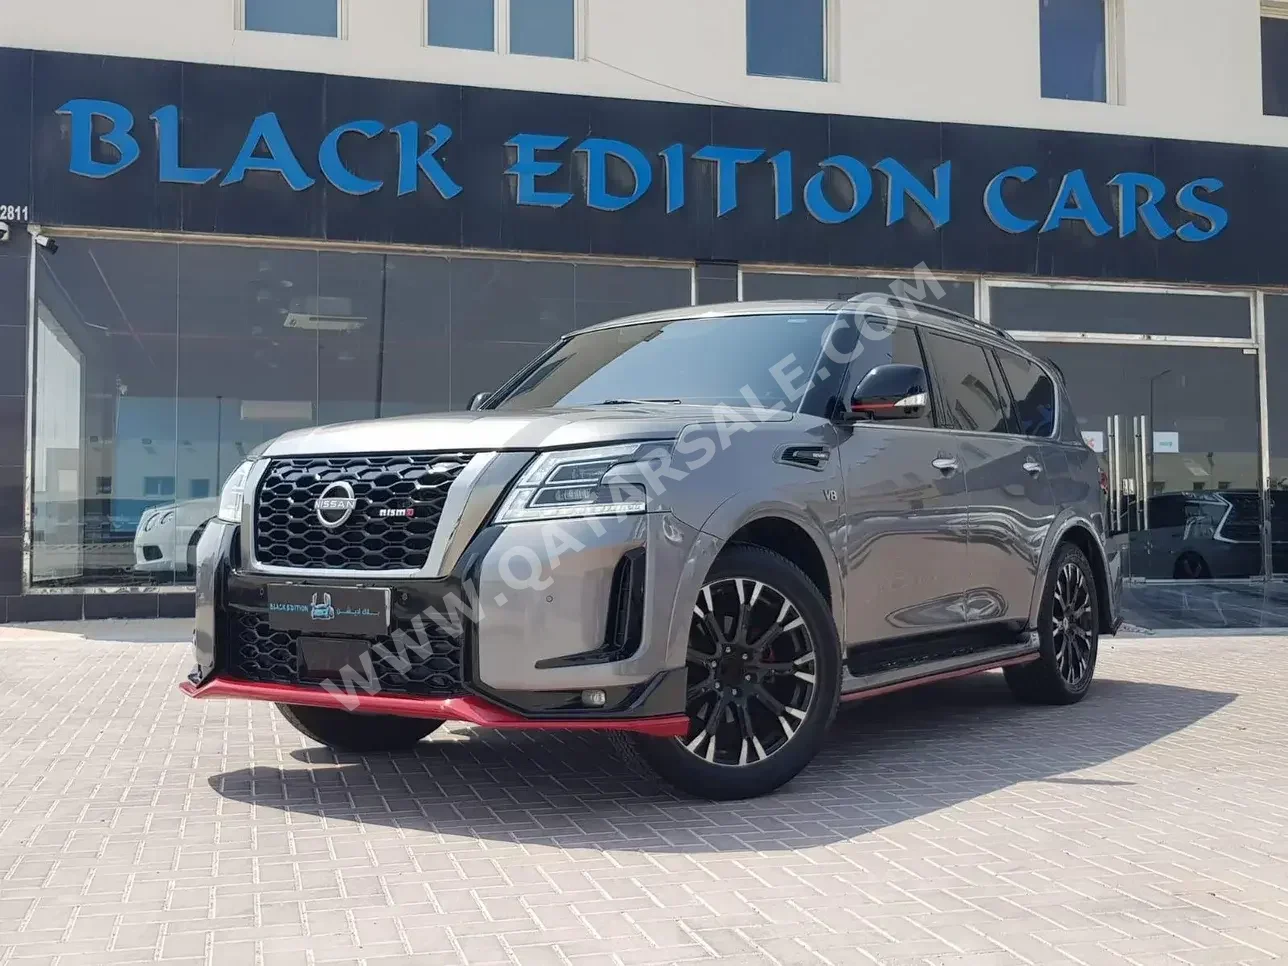 Nissan  Patrol  LE  2018  Automatic  79,000 Km  8 Cylinder  Four Wheel Drive (4WD)  SUV  Gray